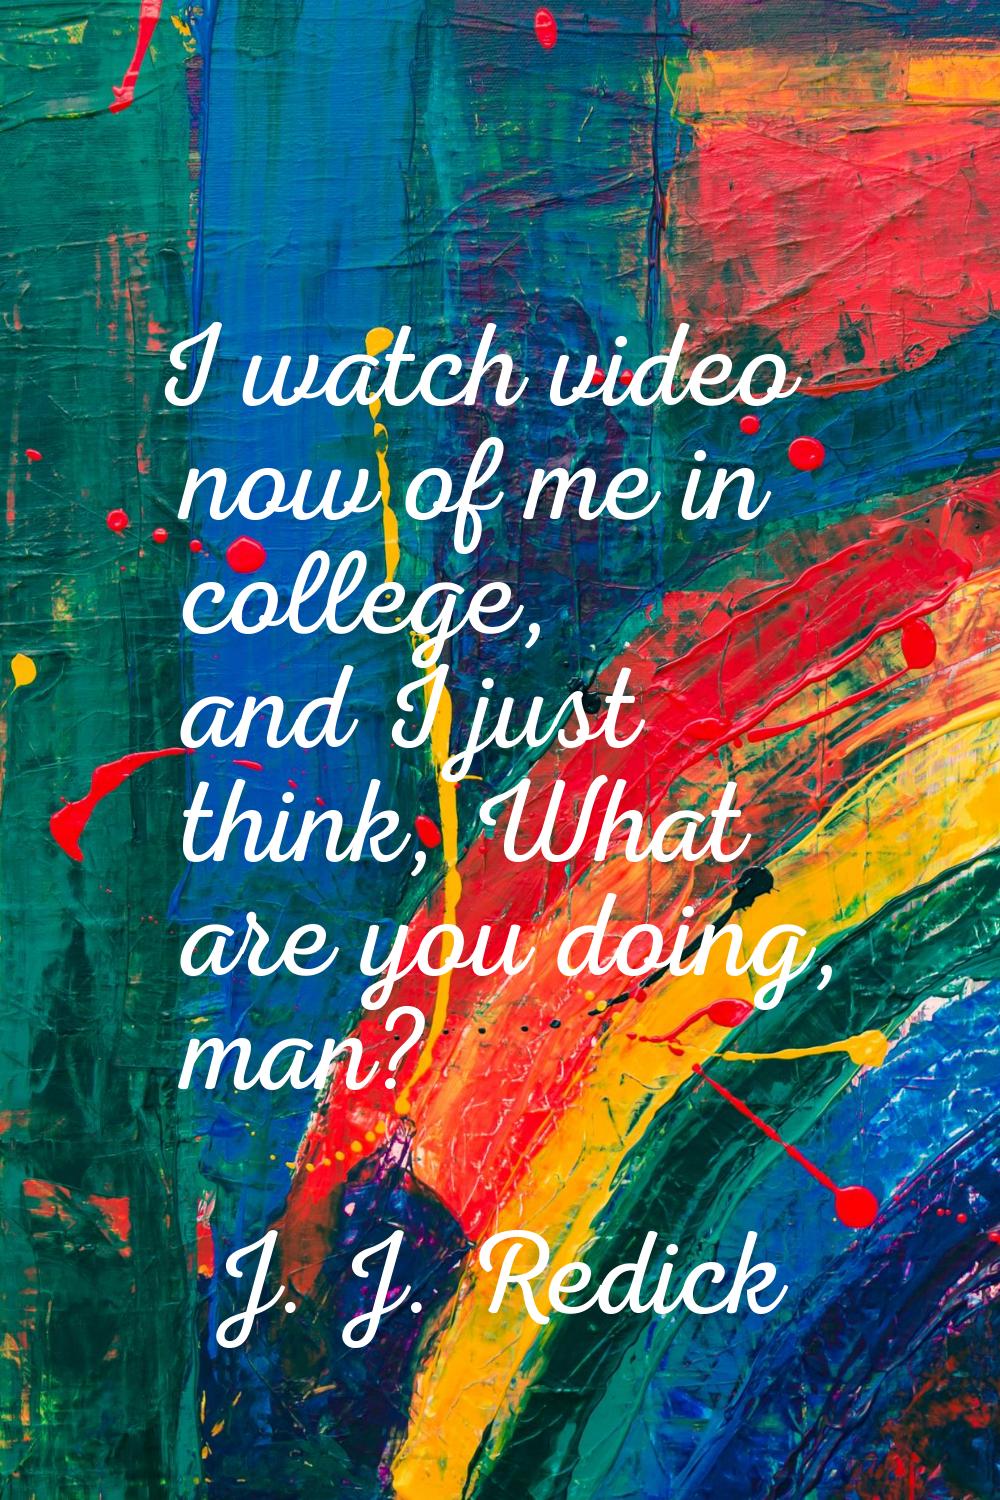 I watch video now of me in college, and I just think, What are you doing, man?